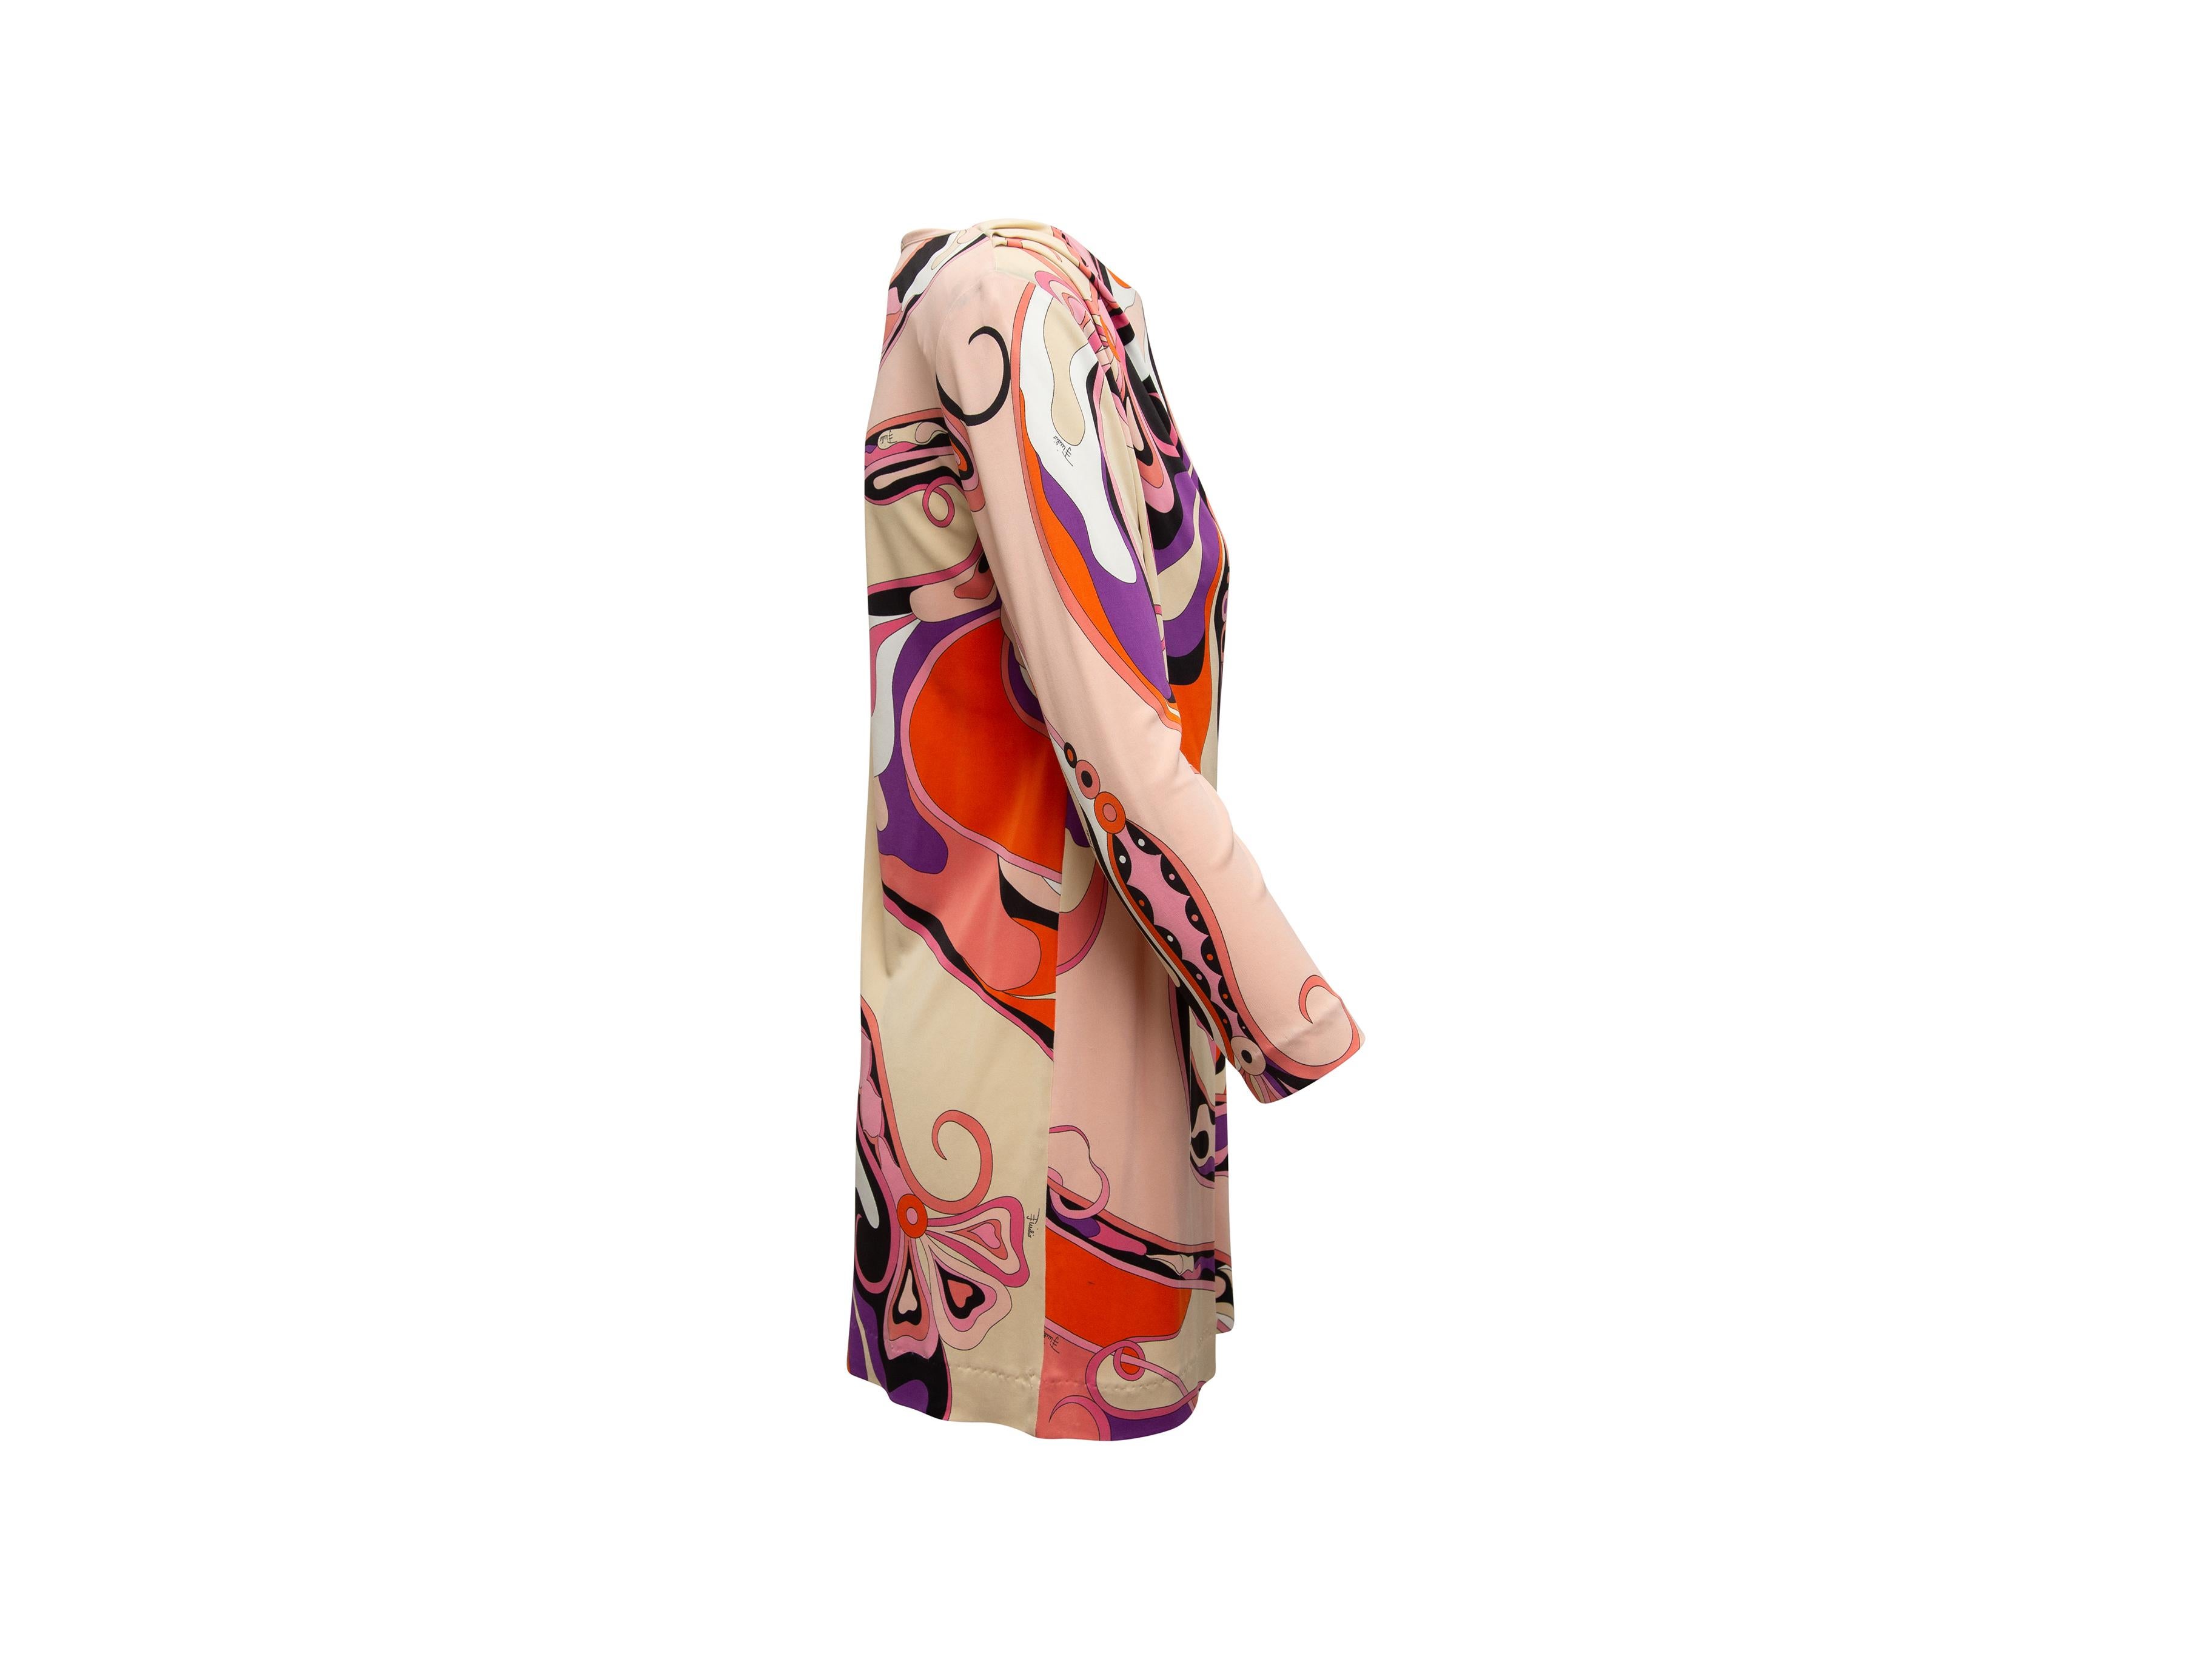 Product details: Light pink and multicolor long sleeve mini dress by Emilio Pucci. Abstract print throughout. Boat neck. Gathering at shoulders. 48